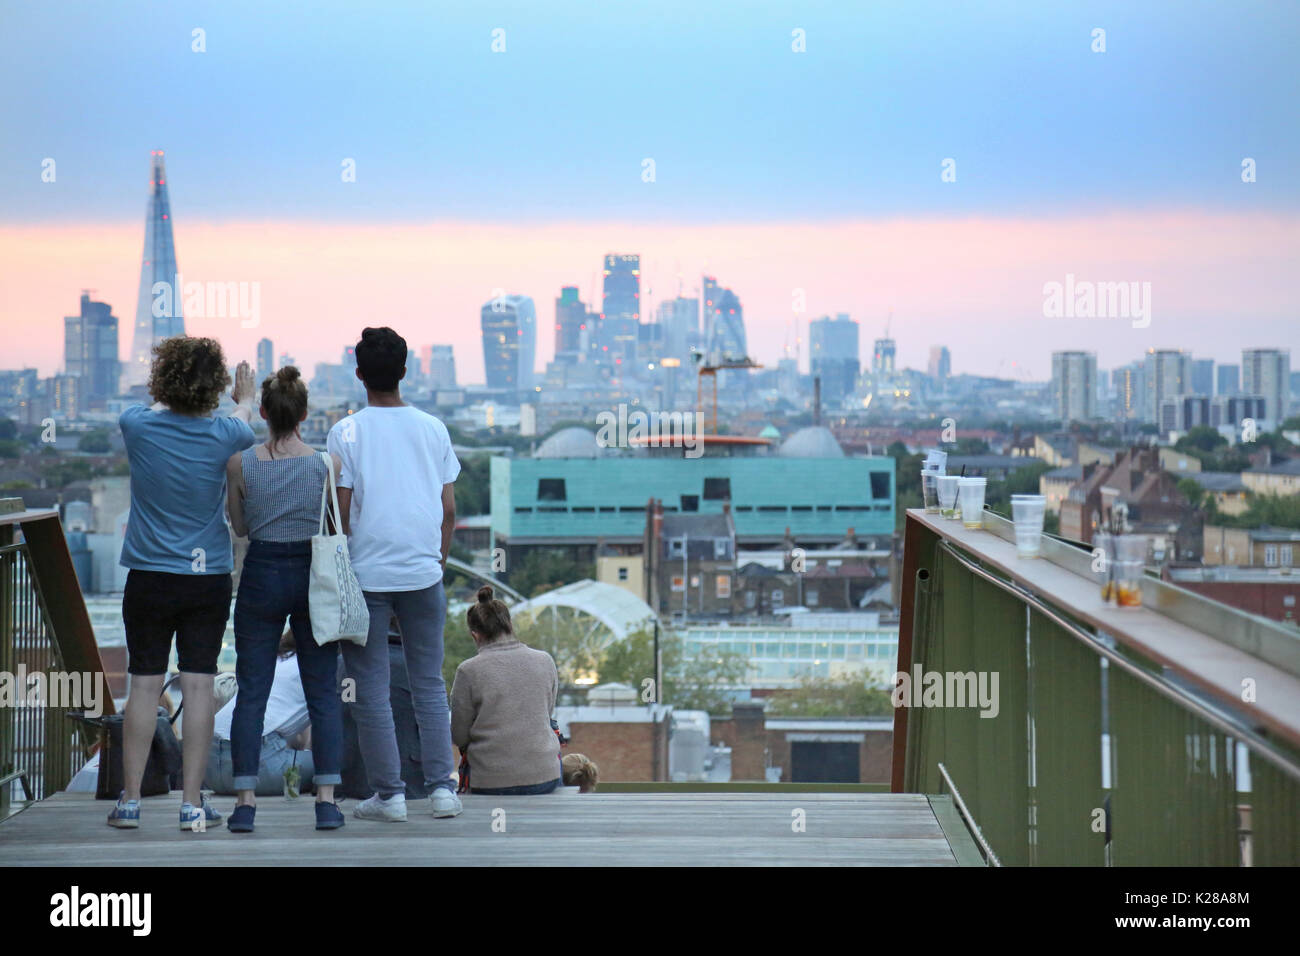 Young people view the London skyline at dusk from Frank's Café, the famous roof-top bar and restaurant on the multi-storey car park in Peckham, UK. Stock Photo